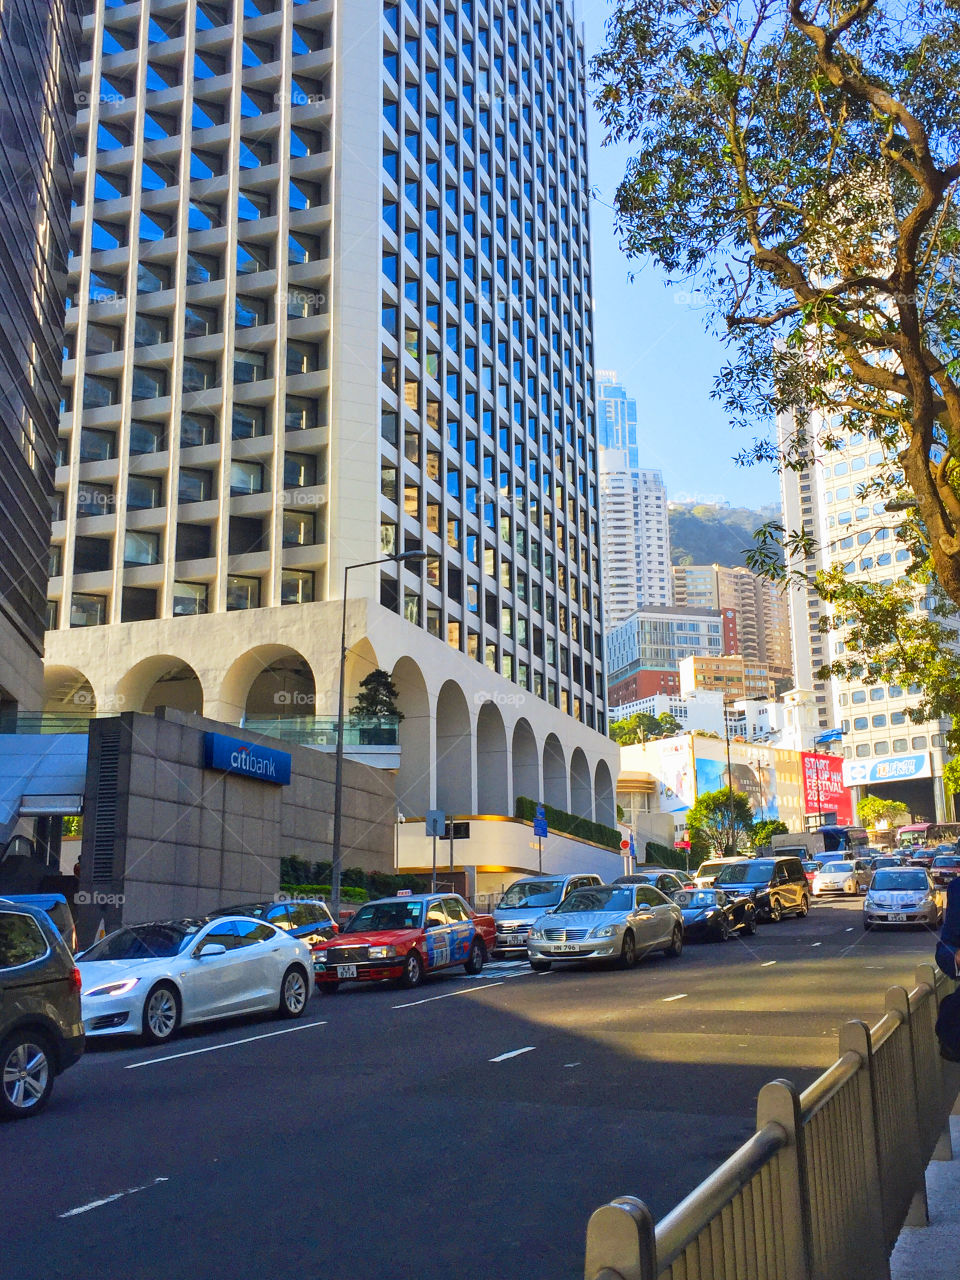 Central streets in Hong Kong